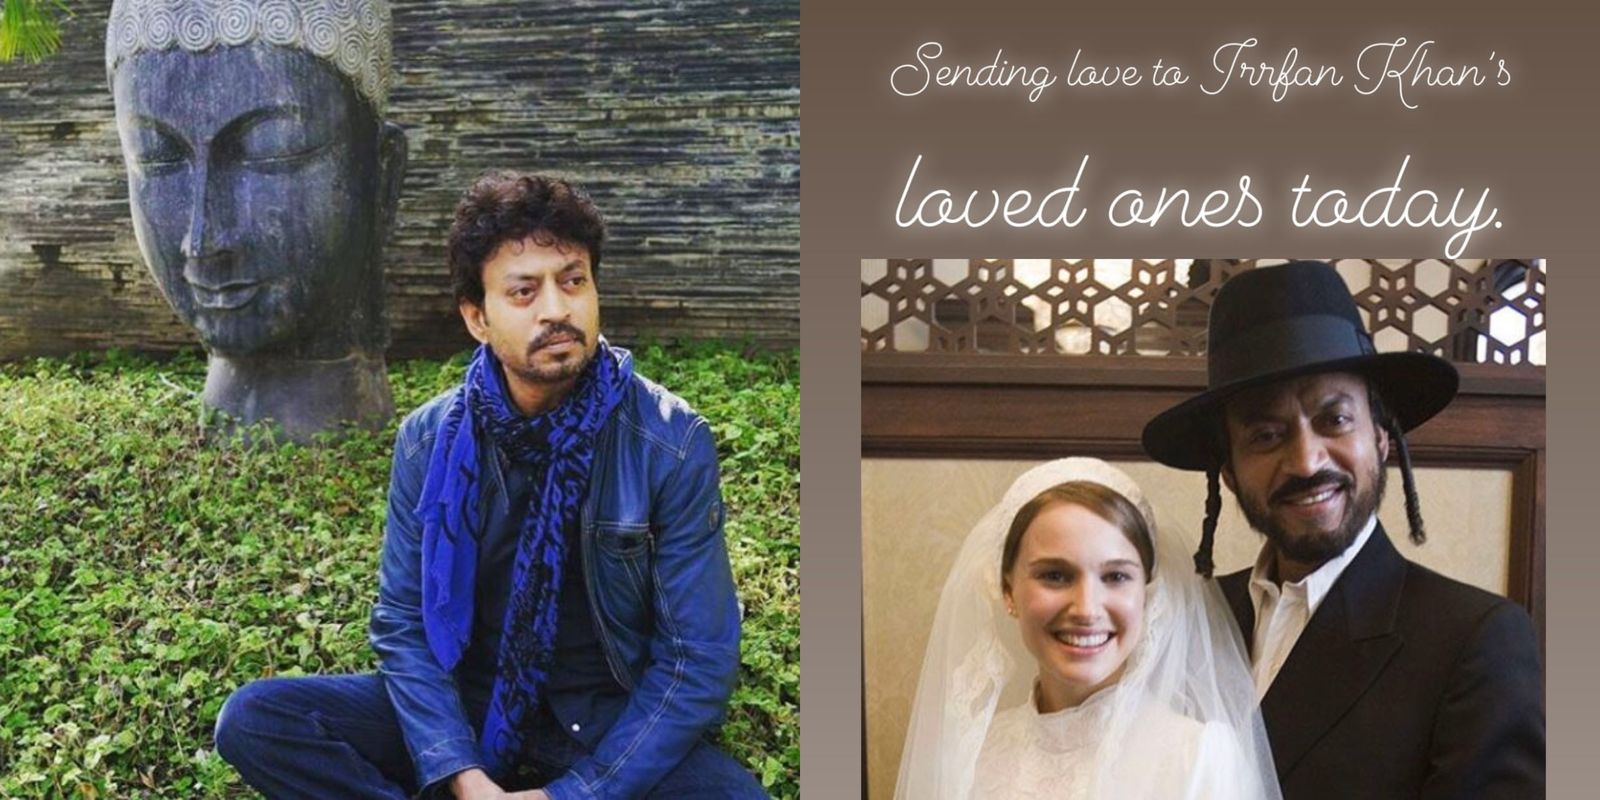 Irrfan Khan’s Hollywood Co-Stars Chris Pratt, Angelina Jolie Mourn The Actor's Death: He Was An Exquisite Actor And Human